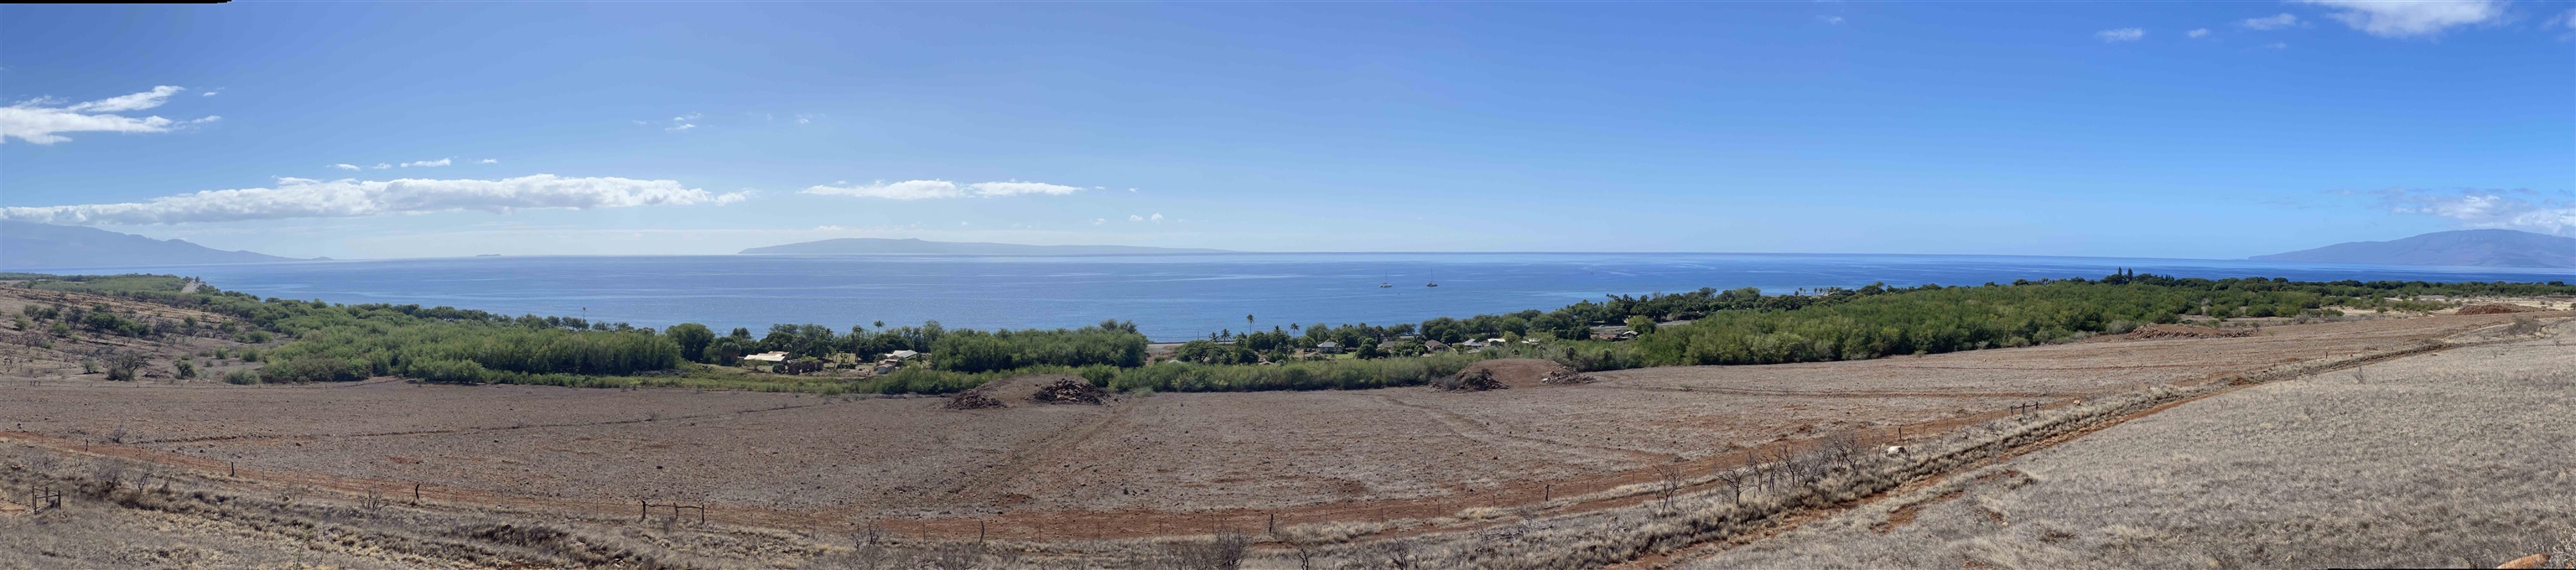 631 Luawai St A Lahaina, Hi vacant land for sale - photo 5 of 6